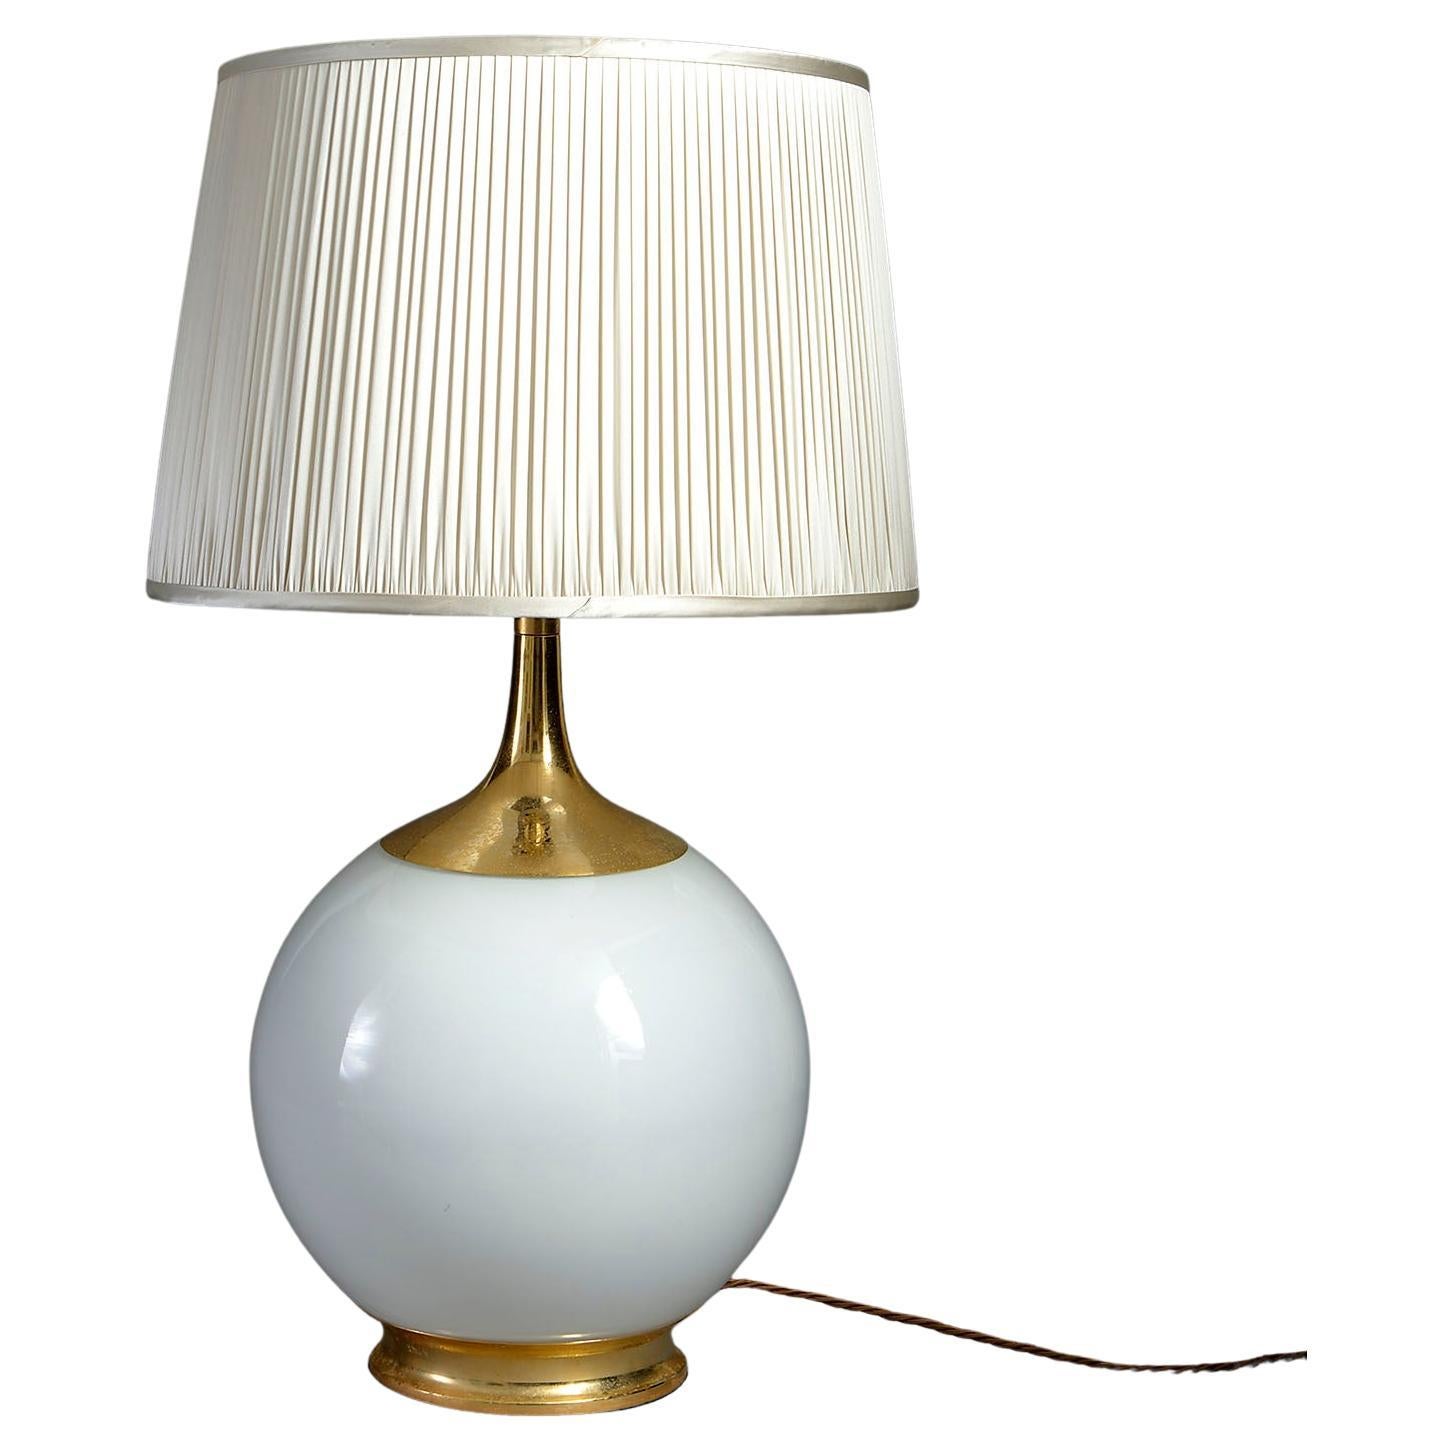 Mid-20th Century Opaline and Gilt Metal Futurist Lamp For Sale